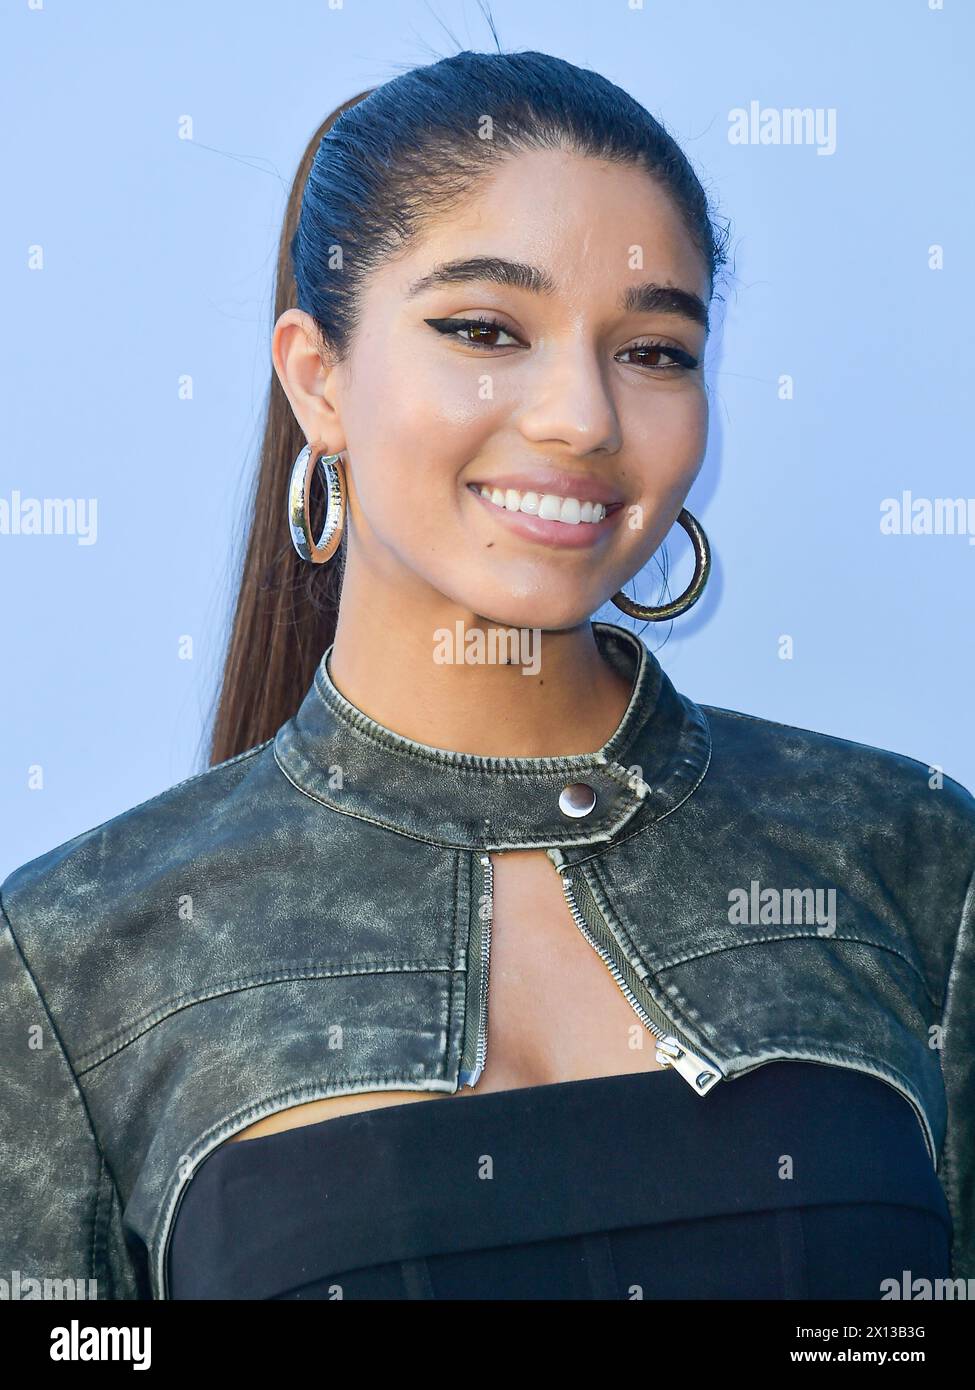 PALM SPRINGS, RIVERSIDE COUNTY, CALIFORNIA, USA - APRIL 13: Yovanna Ventura arrives at the 7th Annual REVOLVE Festival 2024 during the 2024 Coachella Valley Music And Arts Festival - Weekend 1 - Day 2 held at the Parker Palm Springs Hotel on April 13, 2024 in Palm Springs, Riverside County, California, United States. (Photo by Image Press Agency) Stock Photo